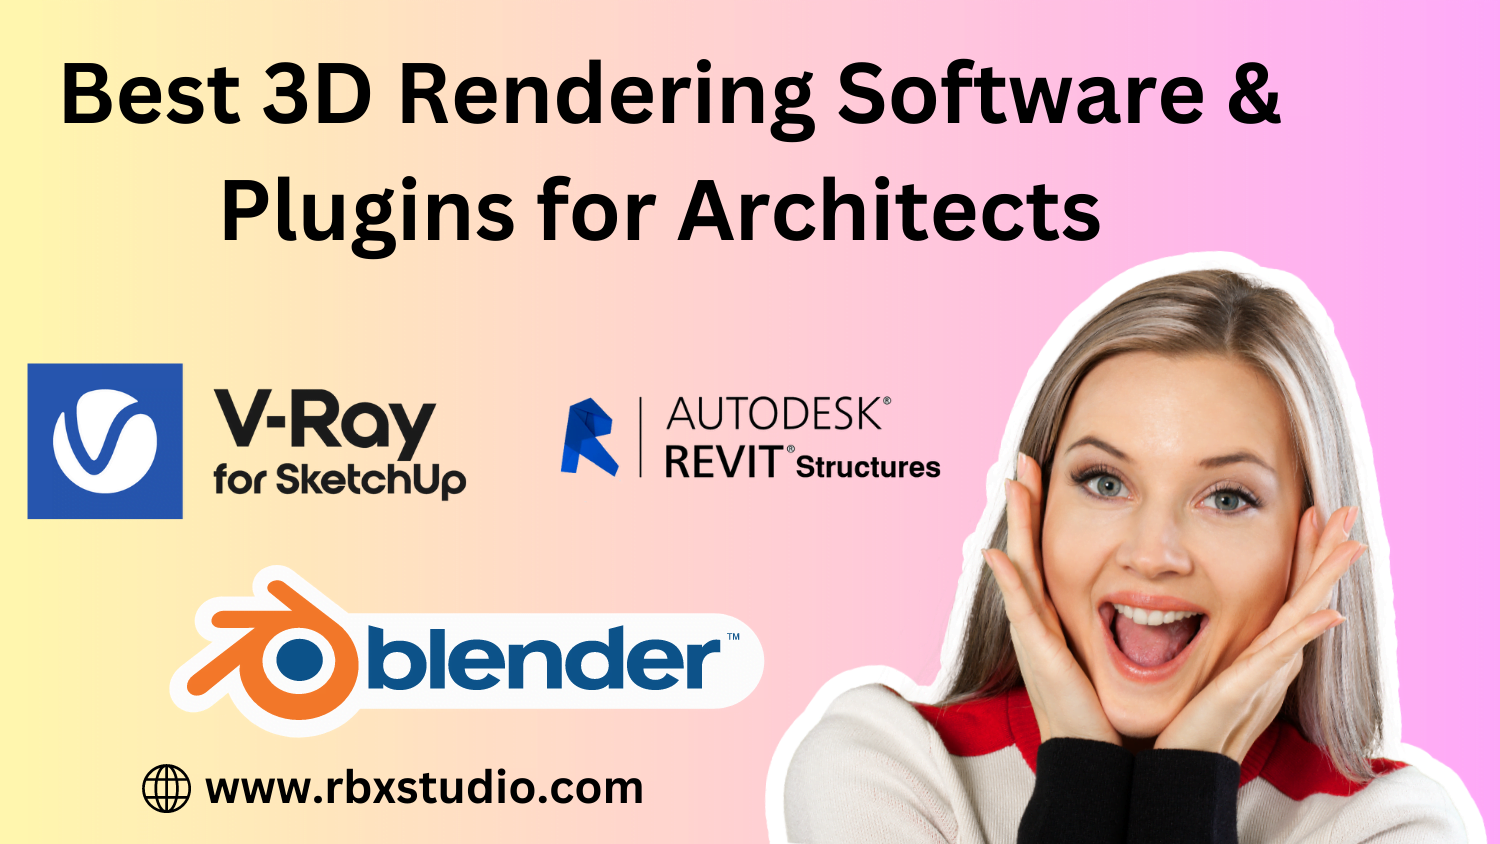 Best 3D Rendering Software & Plugins for Architects